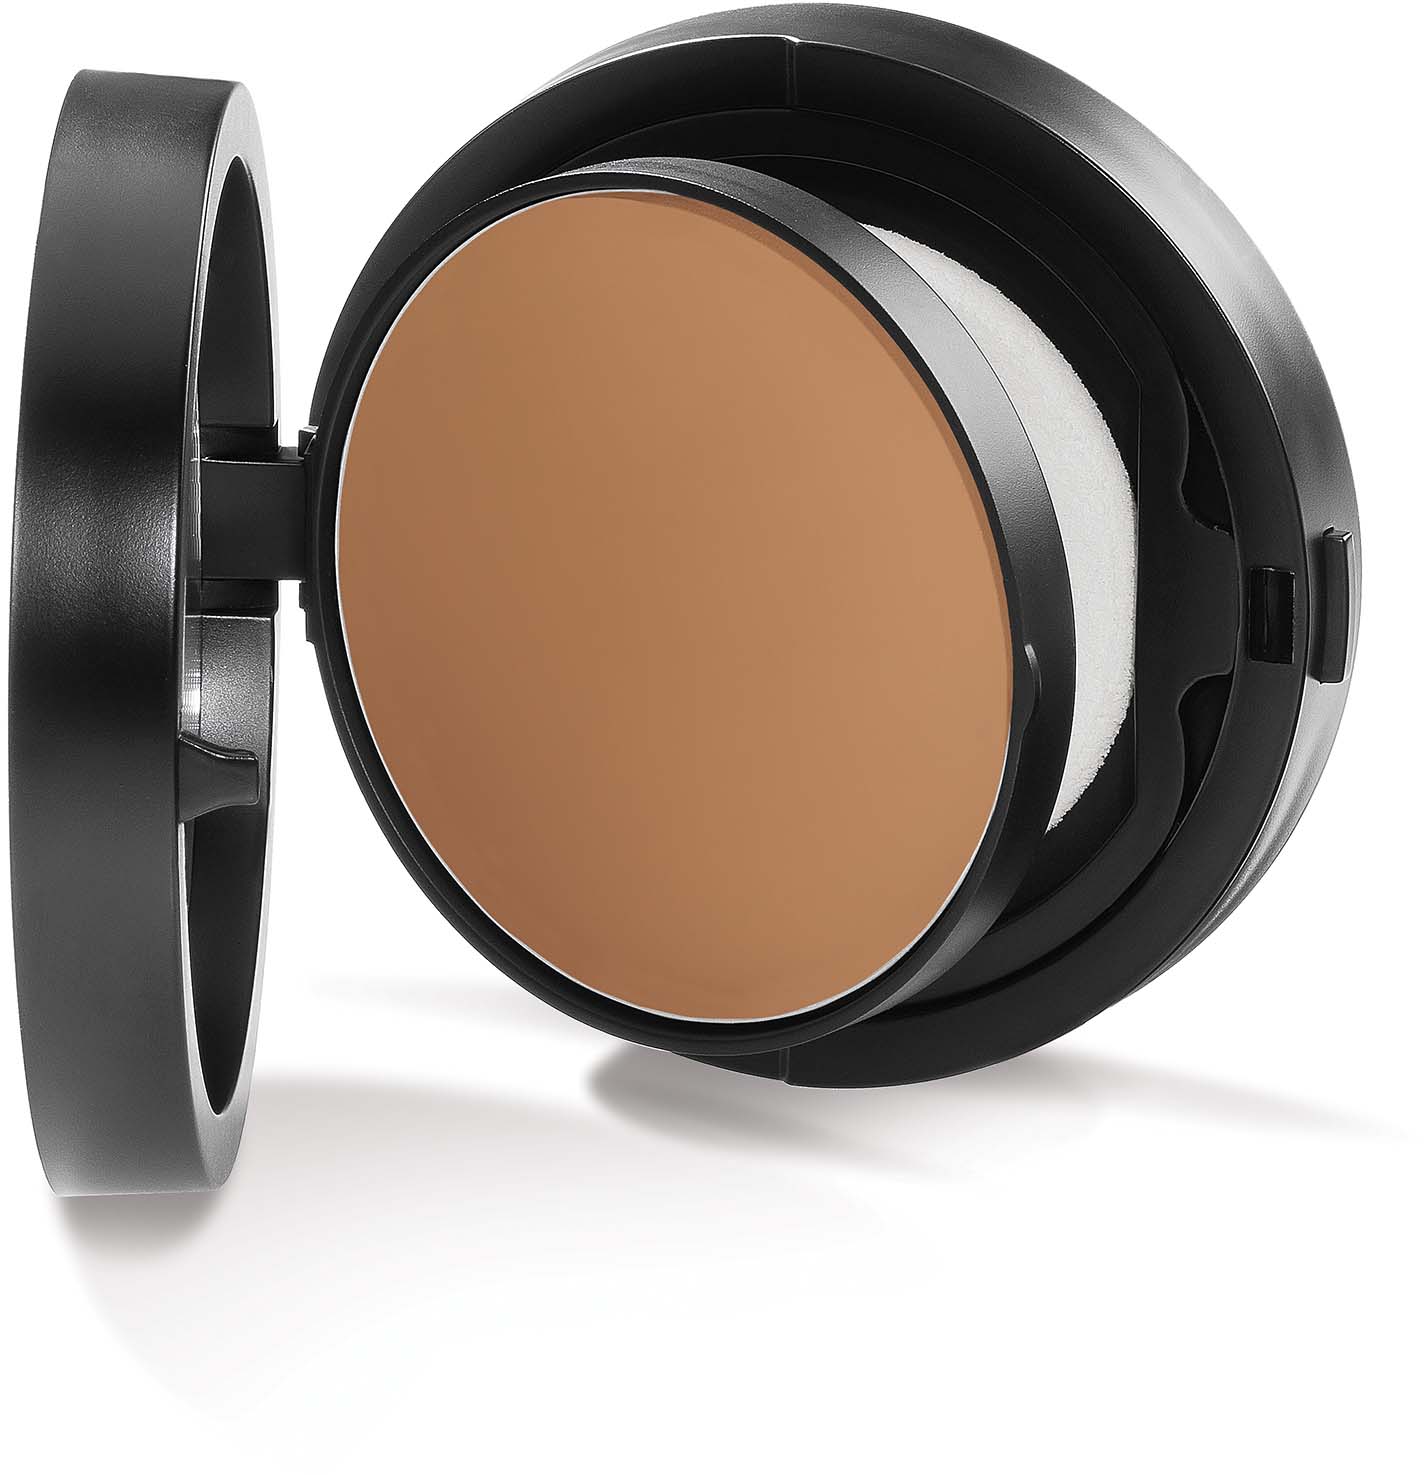 Youngblood Mineral Radiance Crème Powder Foundation 07 Toffee